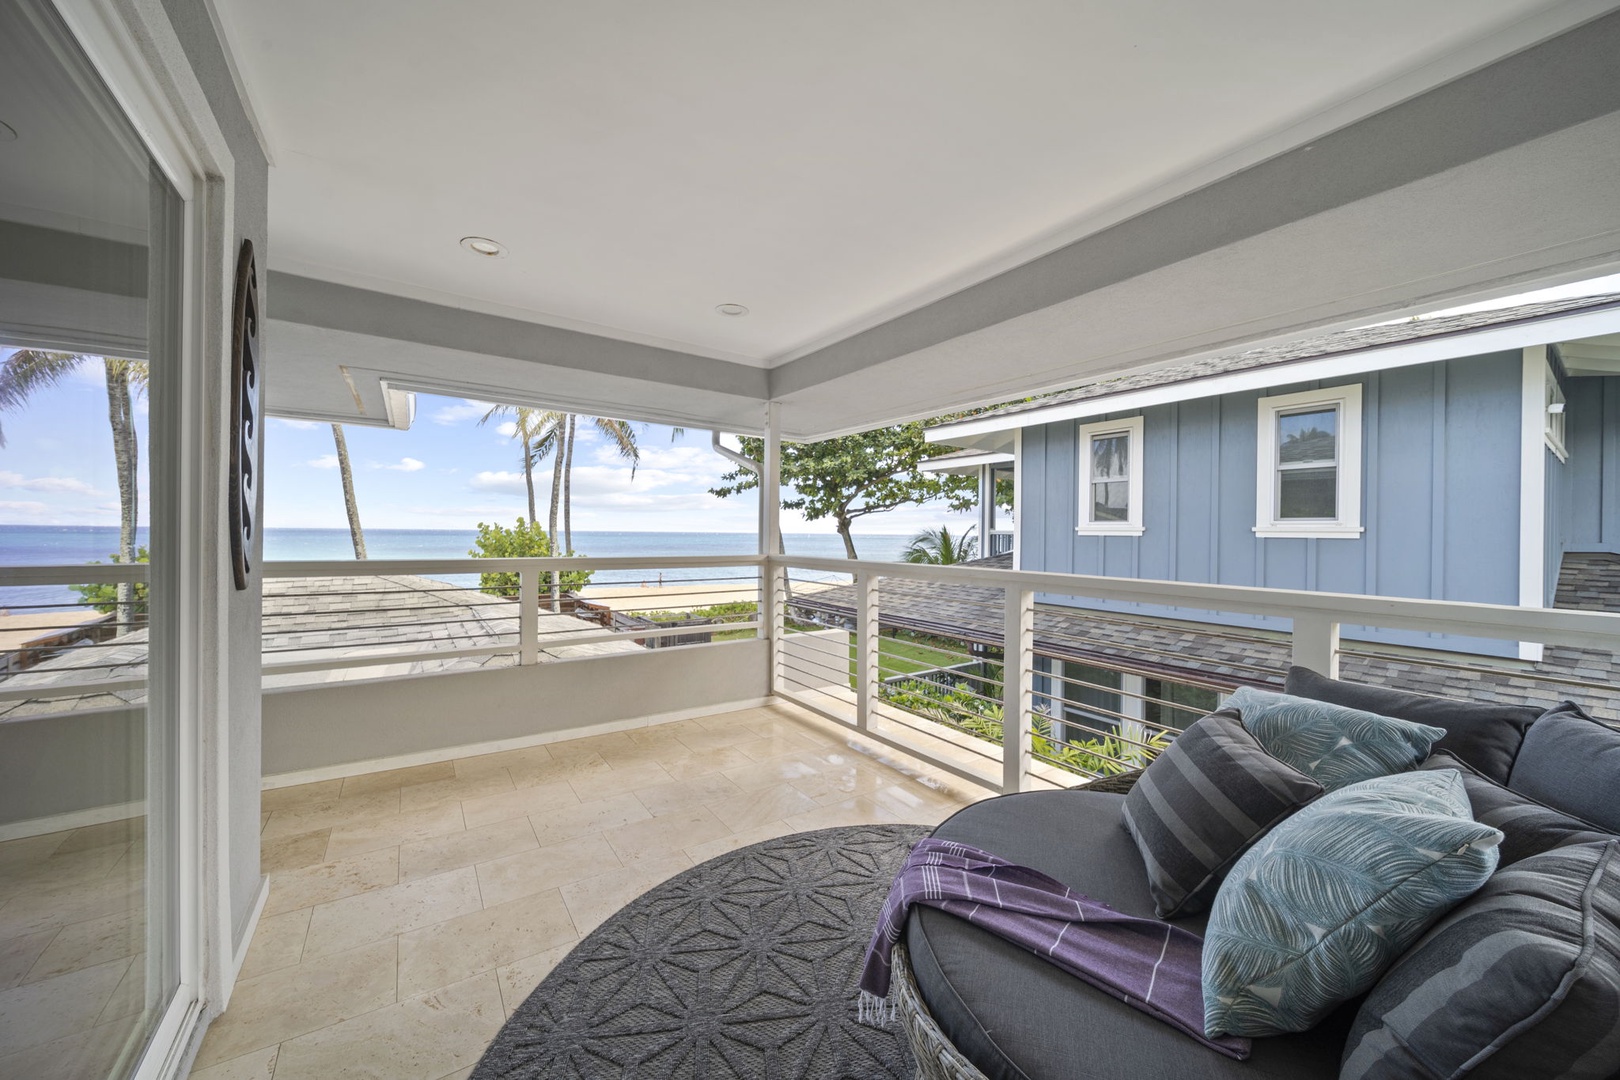 Haleiwa Vacation Rentals, Hale Nalu - Enjoy the gentle breezes from the beach on the upper level lanai